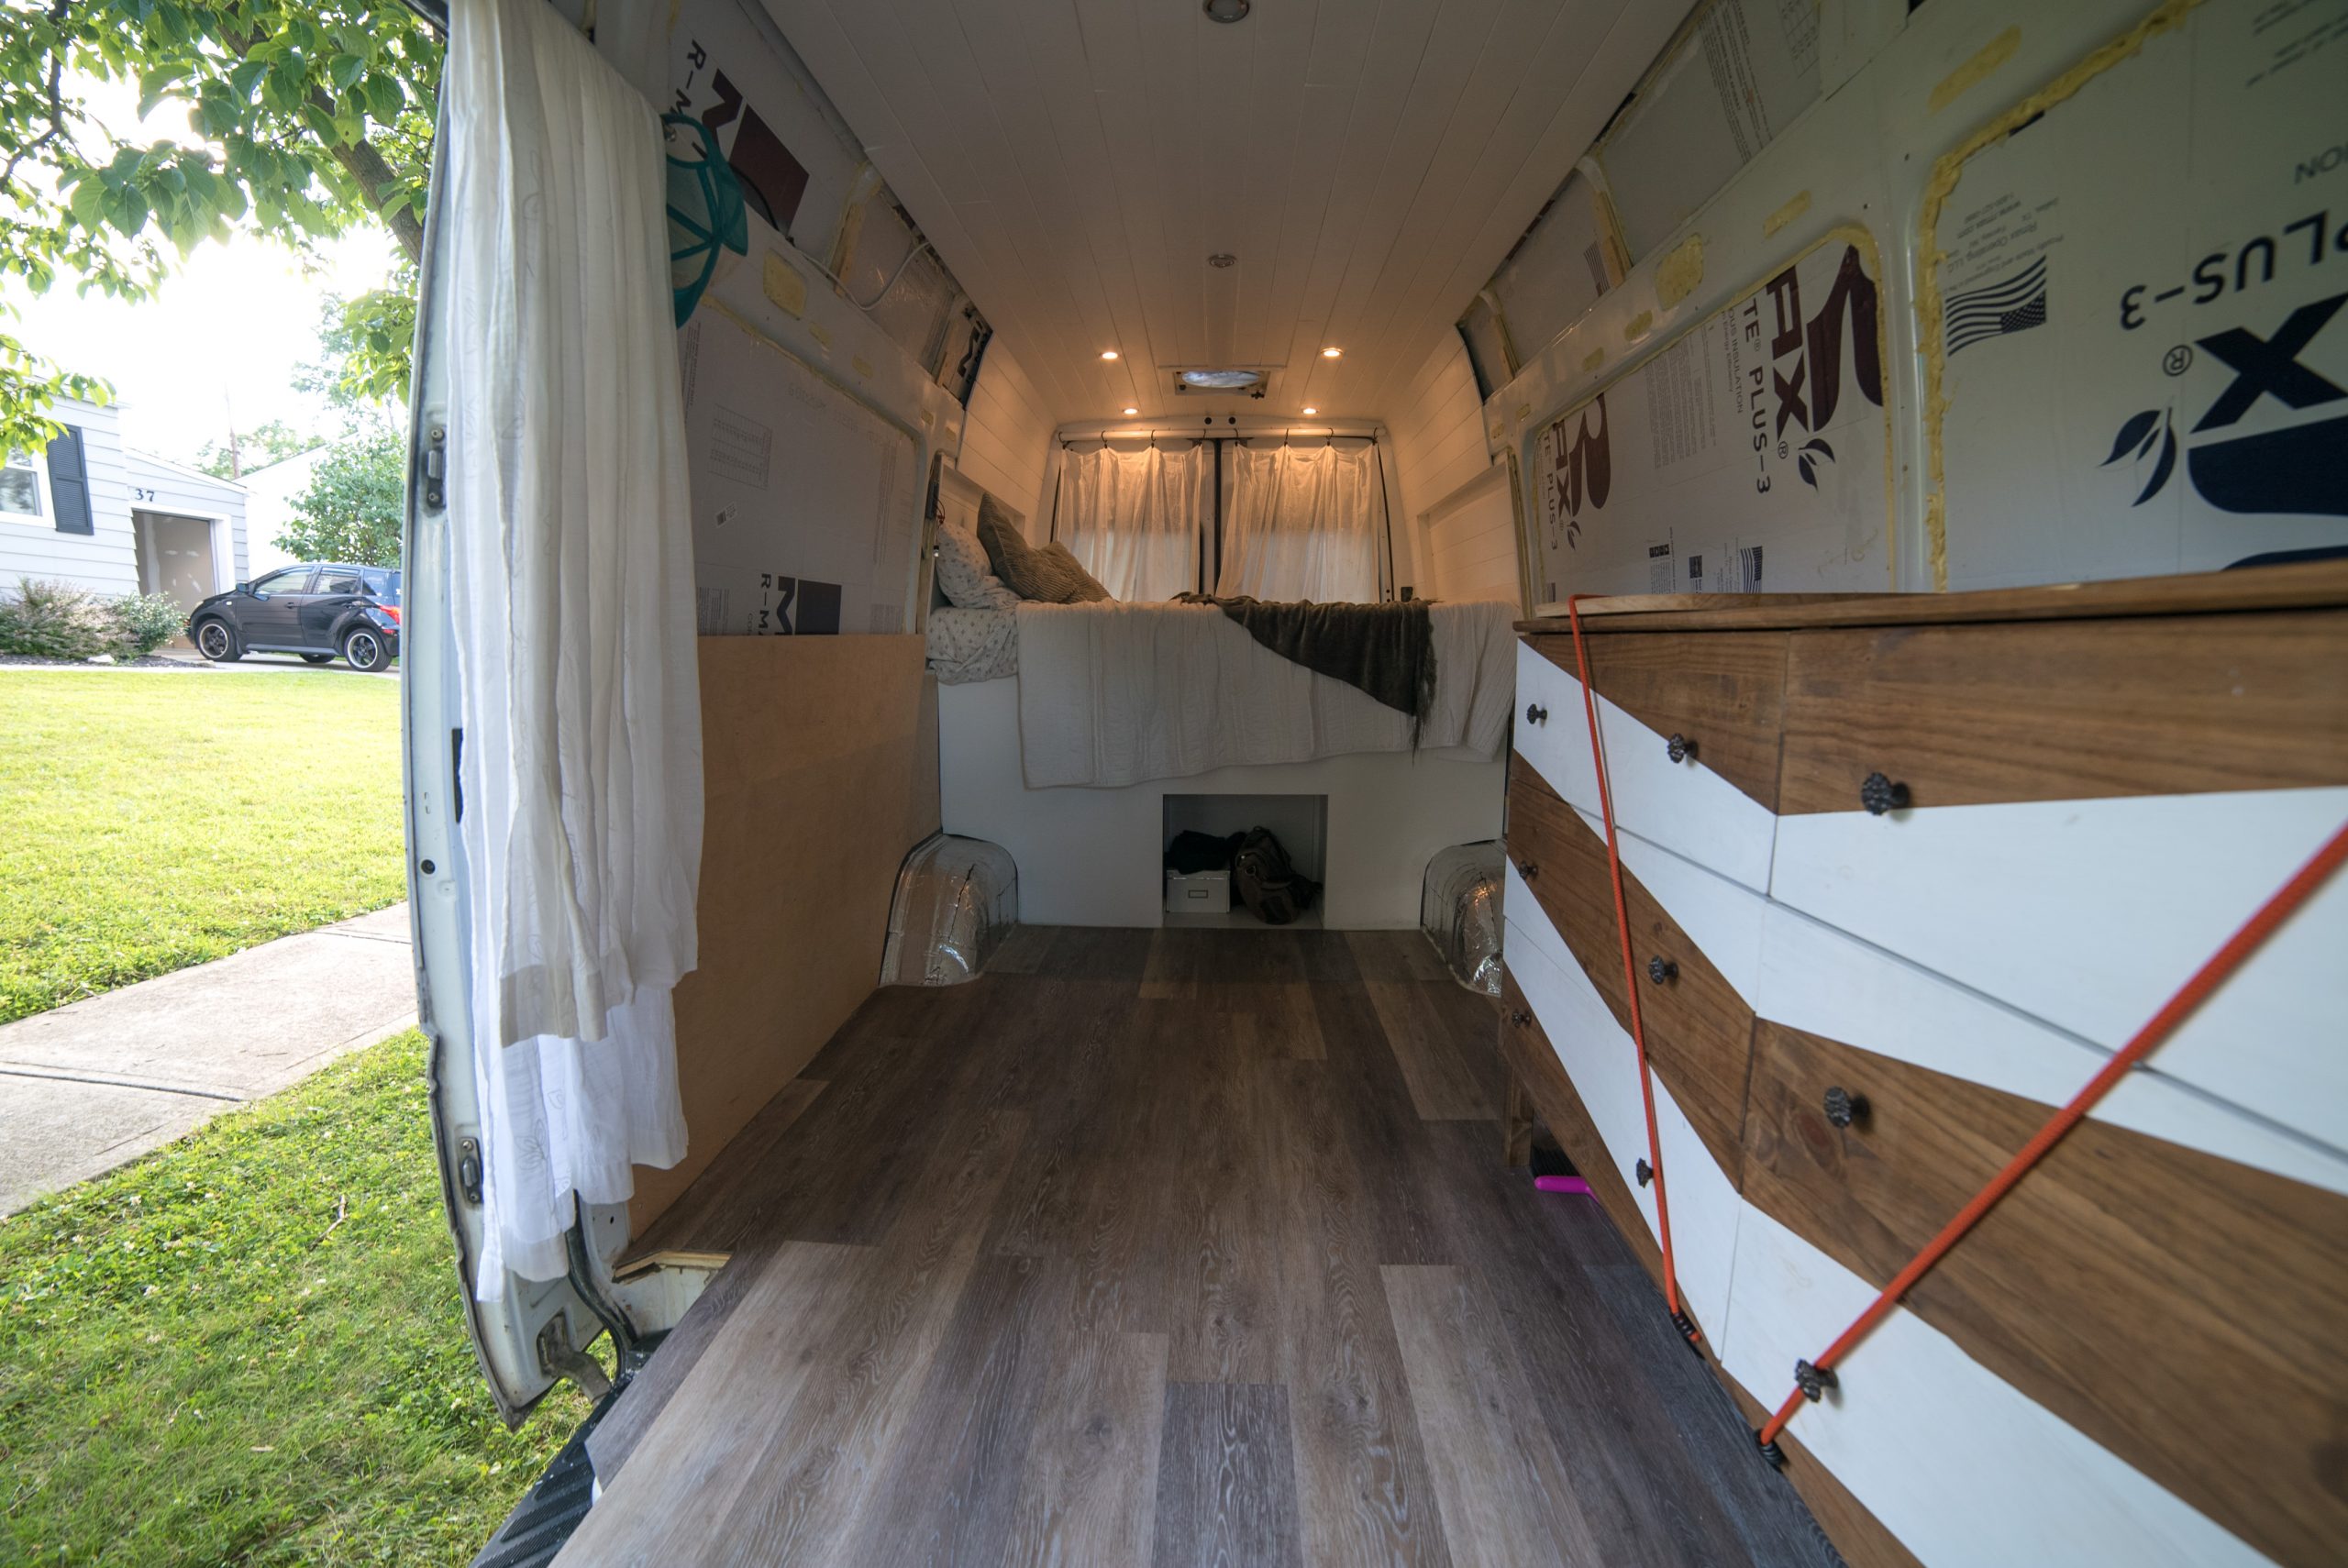 The layout inside of a converted camper van